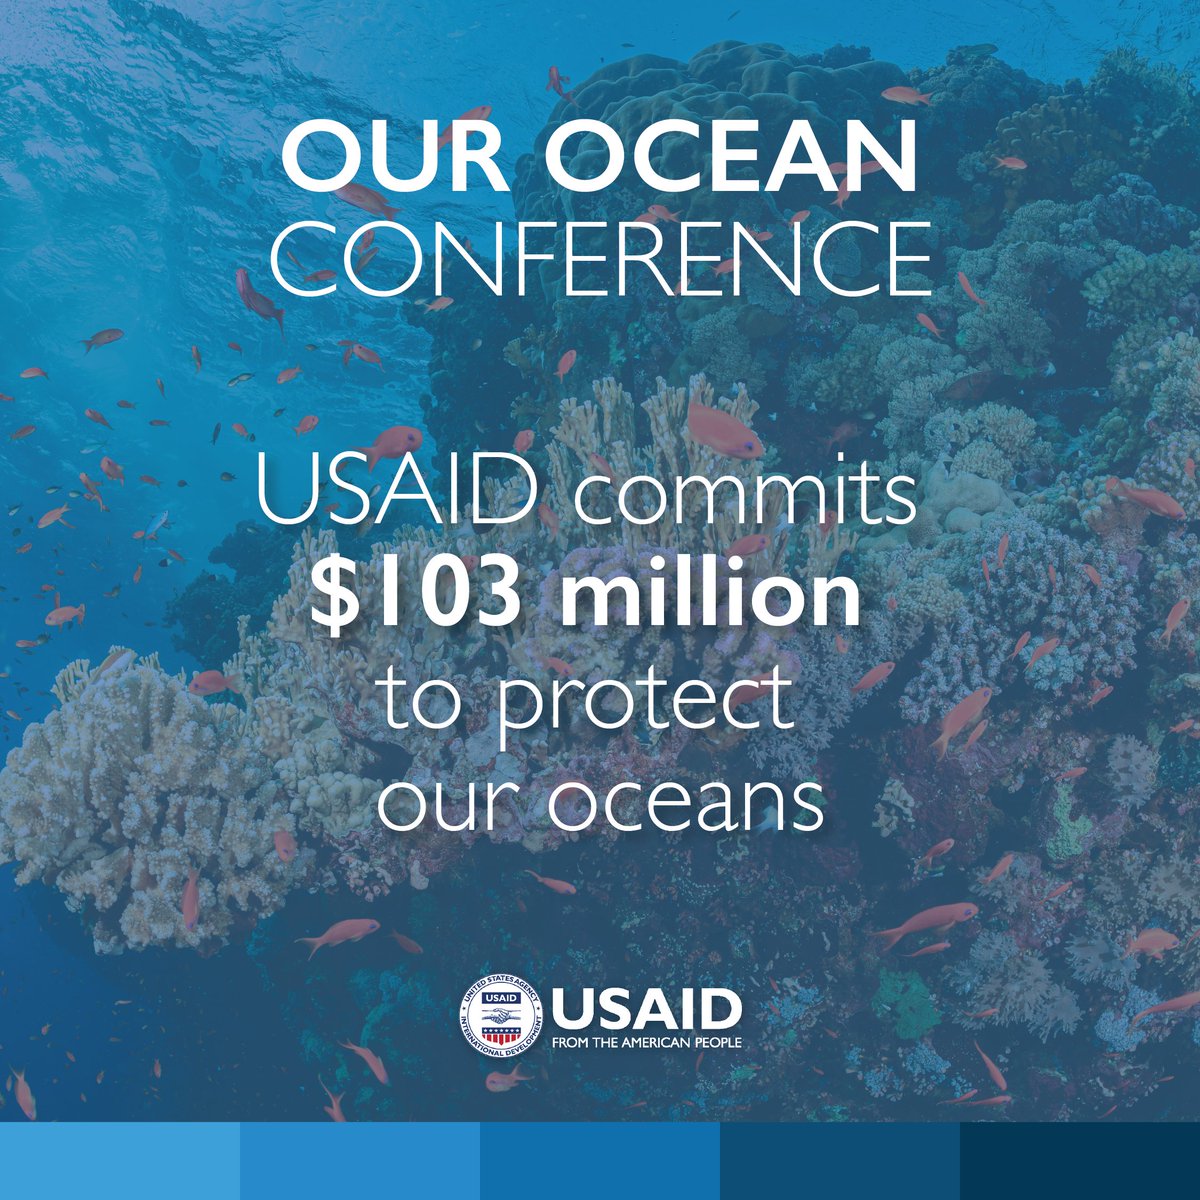 We all depend on a healthy ocean. At #OurOceanGreece Conference, USAID announced $103 million to advance marine protections, fisheries and climate change resilience worldwide: usaid.gov/news-informati…